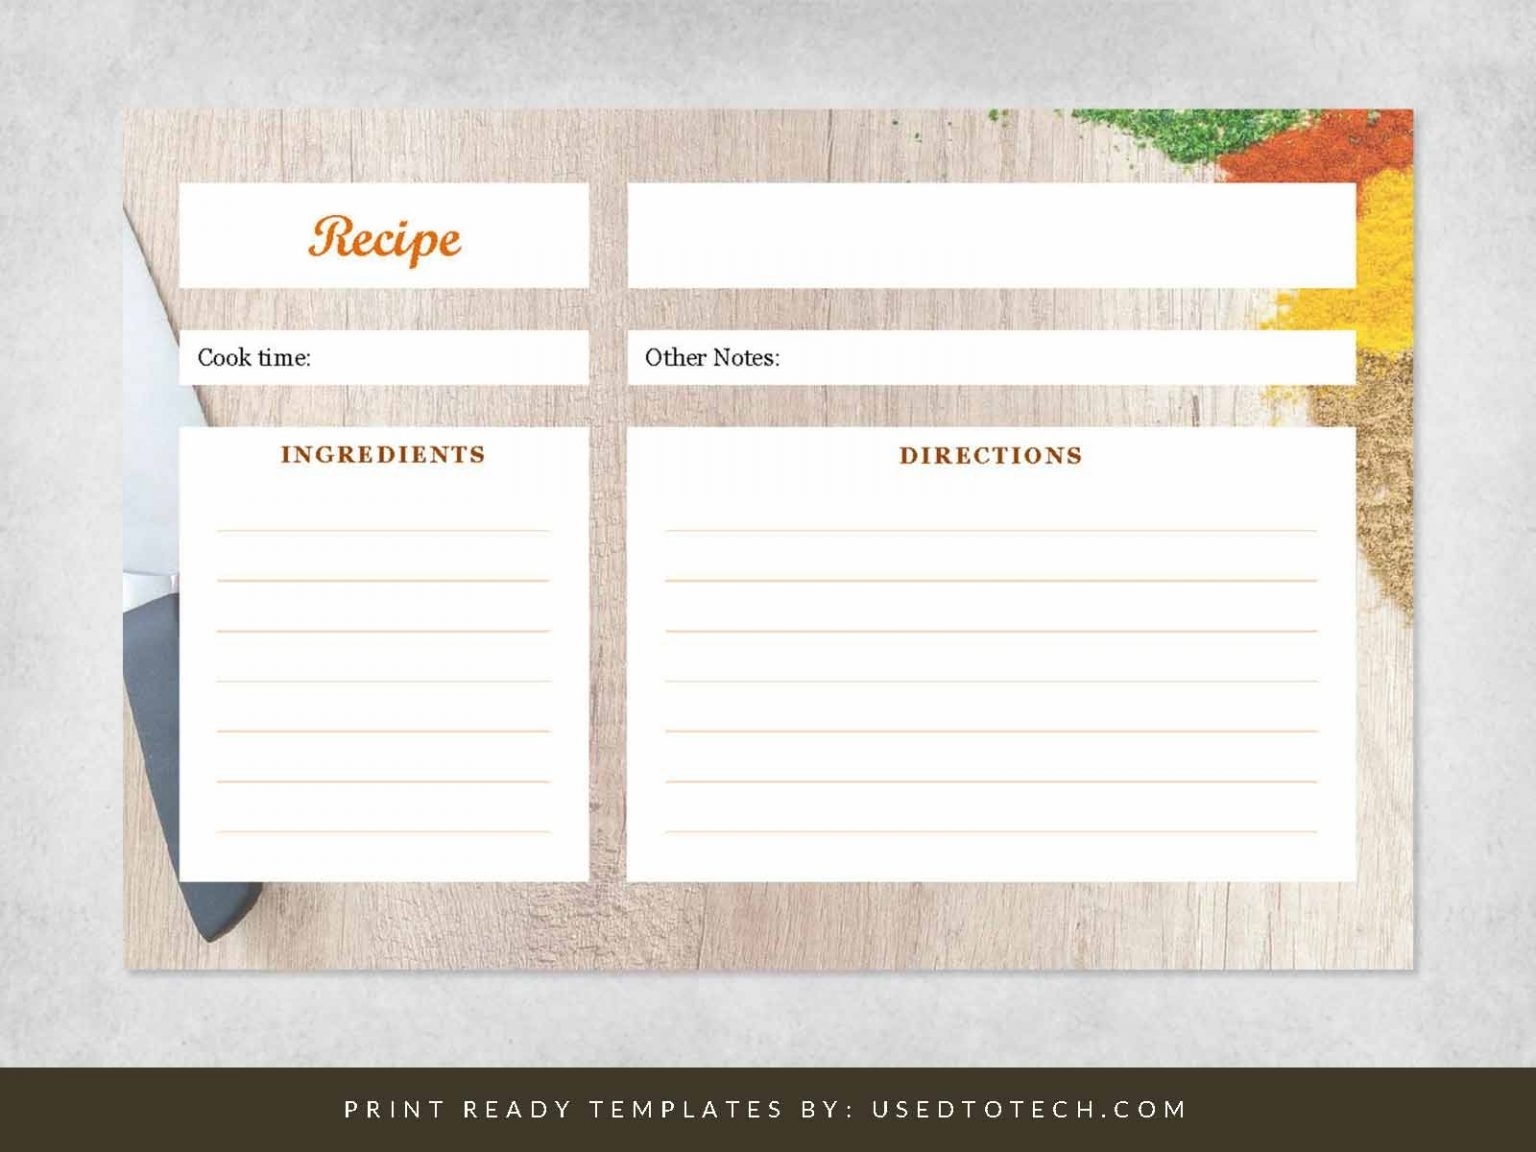 Fancy 4 X 6 Recipe Card Template For Word – Used To Tech Throughout Microsoft Word Recipe Card Template